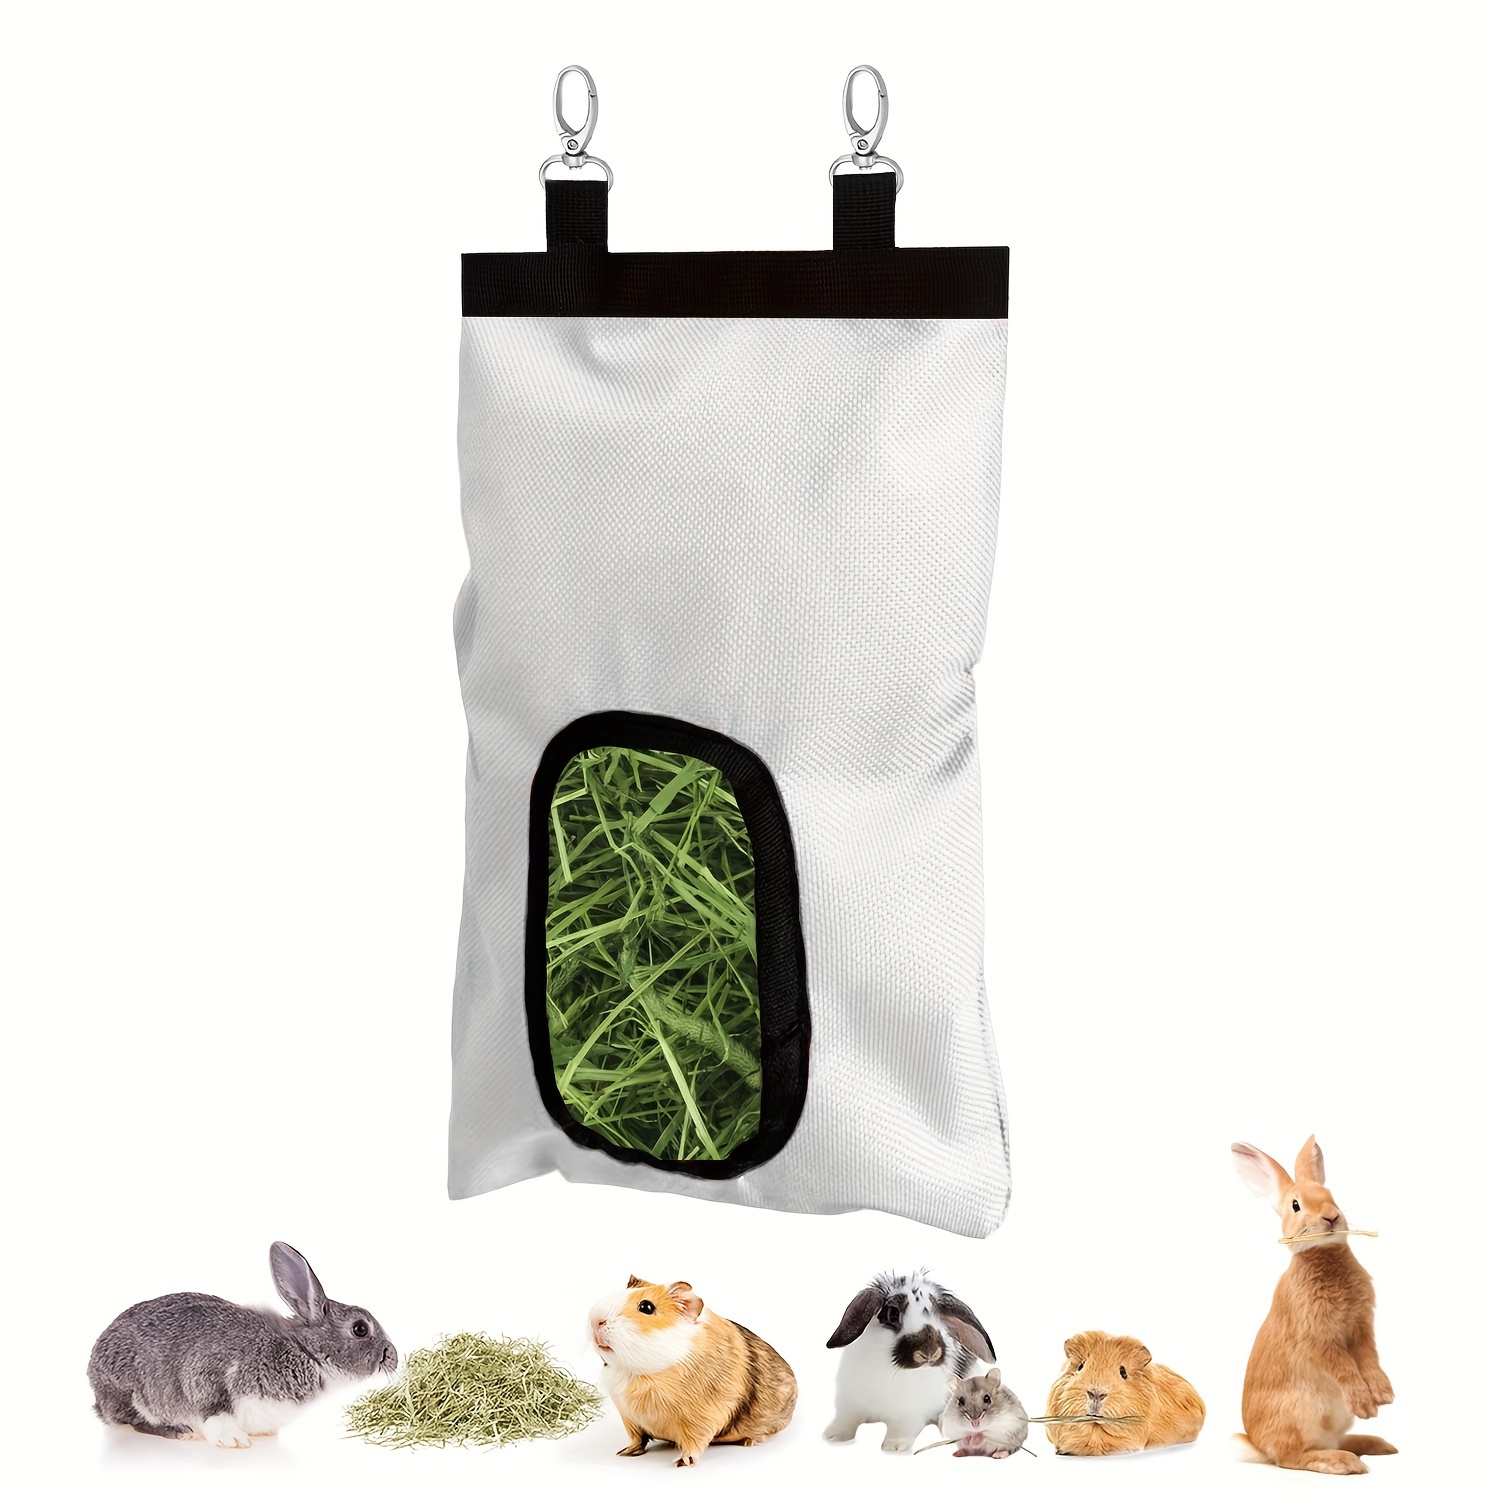 

Rabbit Hay Feeder Bag With 1/2/3/4 Holes Hay Feeder Hanging Storage For Rabbit Guinea Pig Chinchilla, 600d Oxford Cloth Fabric